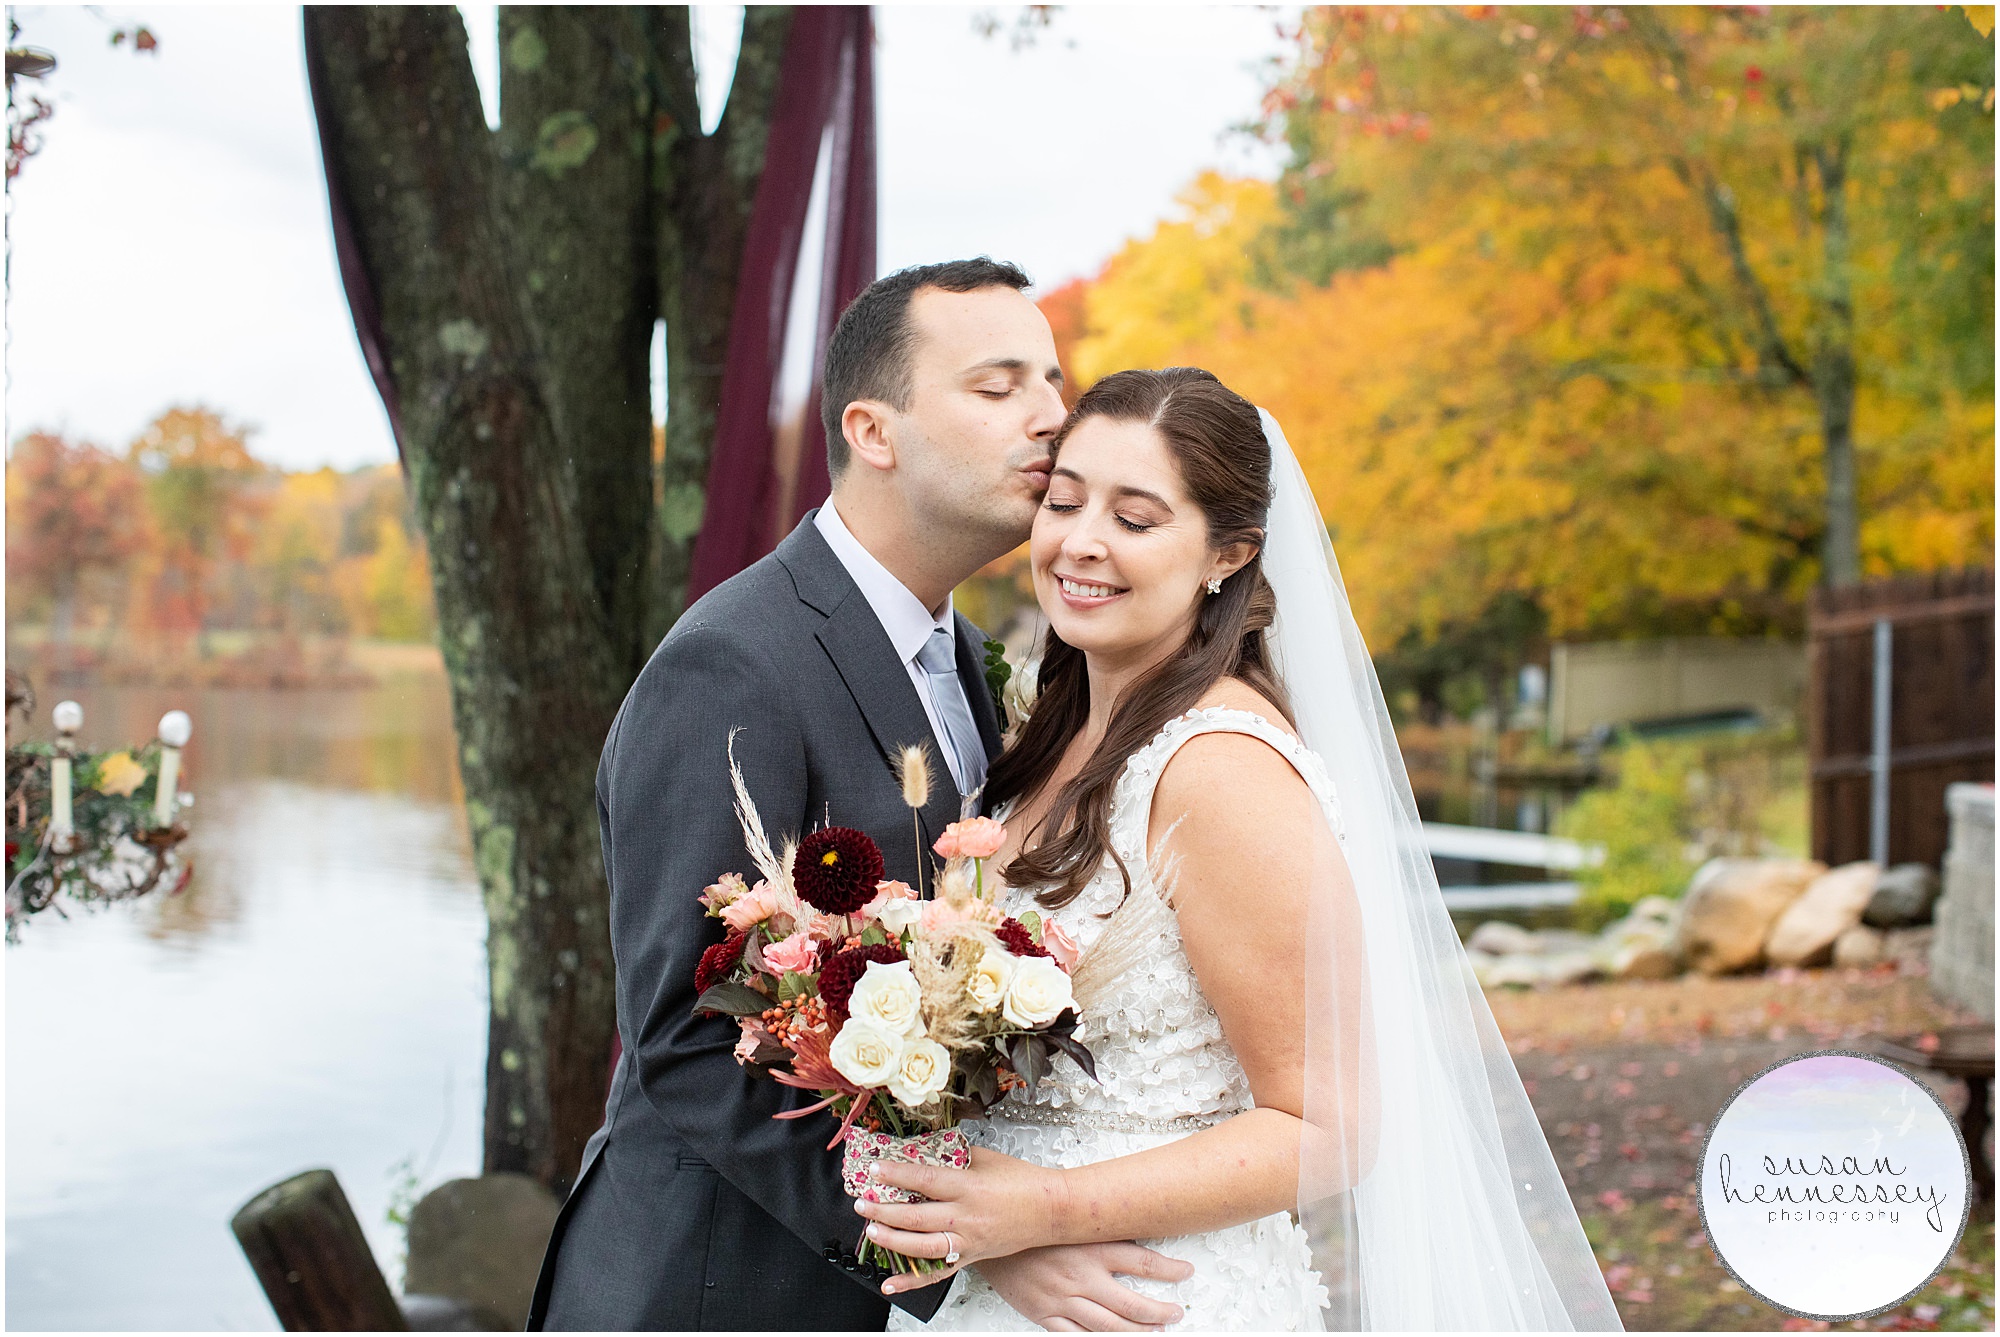 Intimate wedding at Andre's Lakeside Dining Microwedding